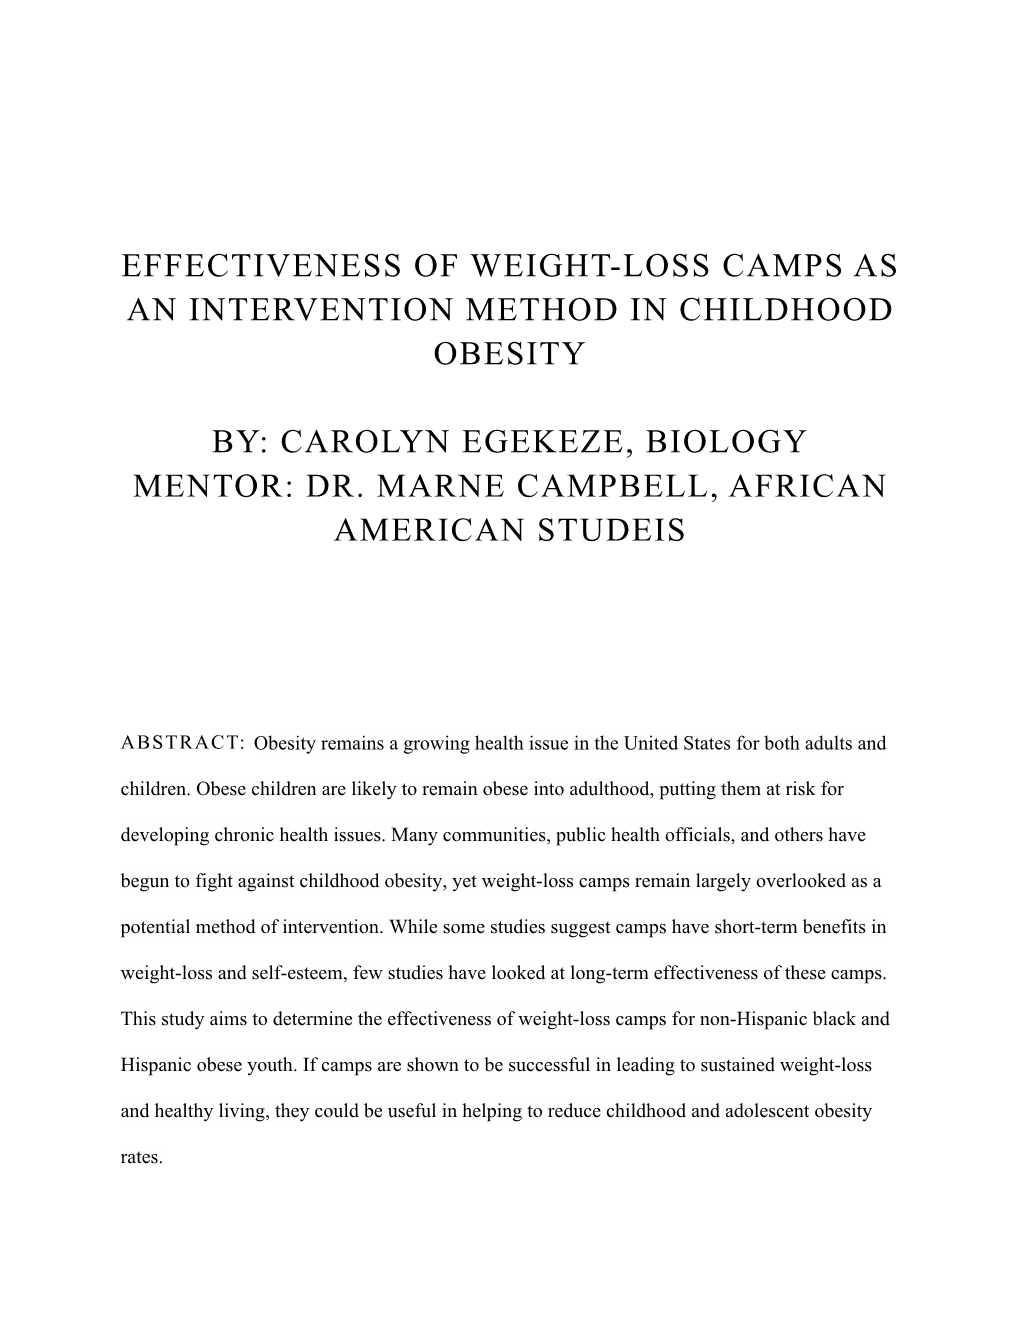 Effectiveness of Weight-Loss Camps As an Intervention Method in Childhood Obesity